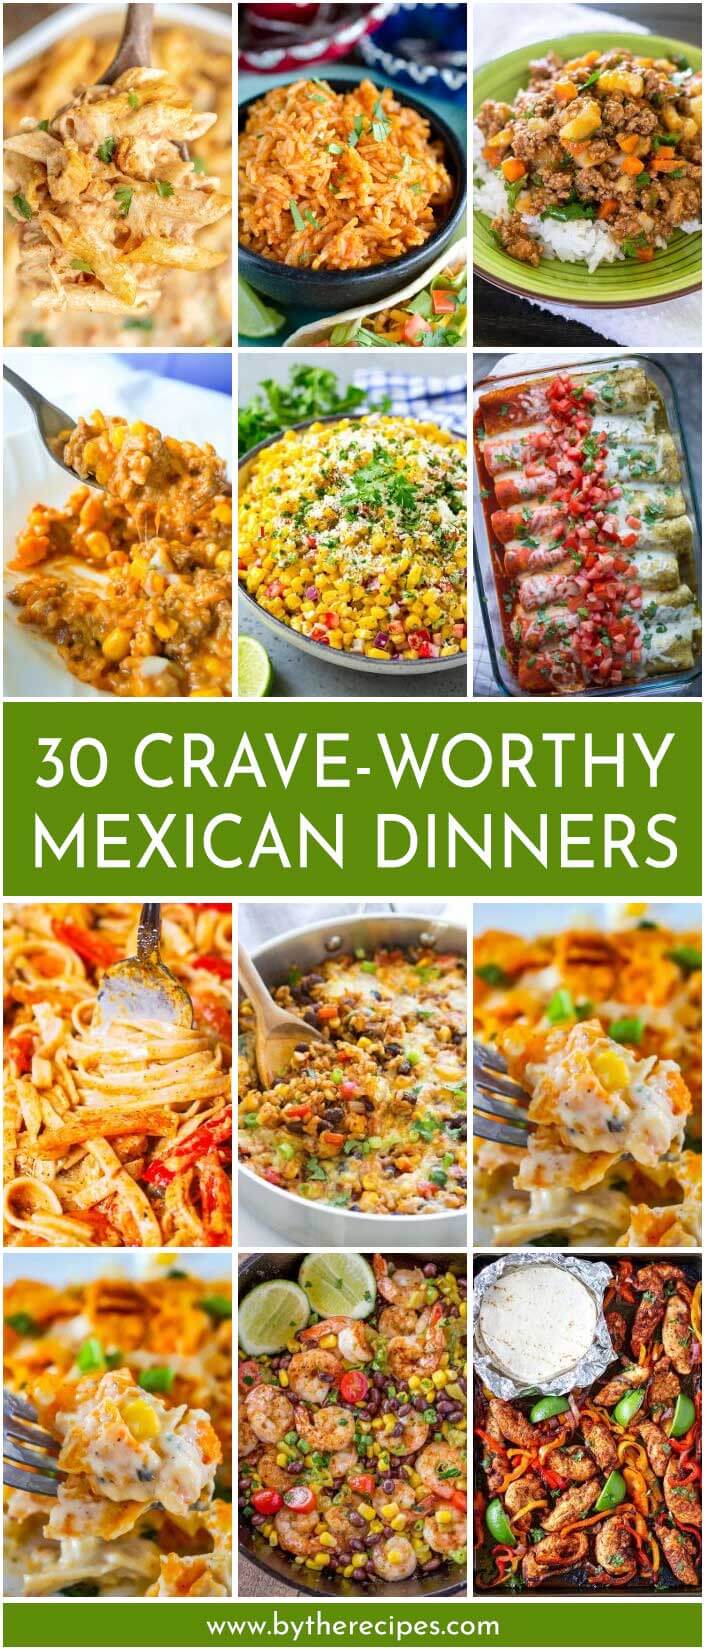 30 Crave-Worthy Mexican Dinners